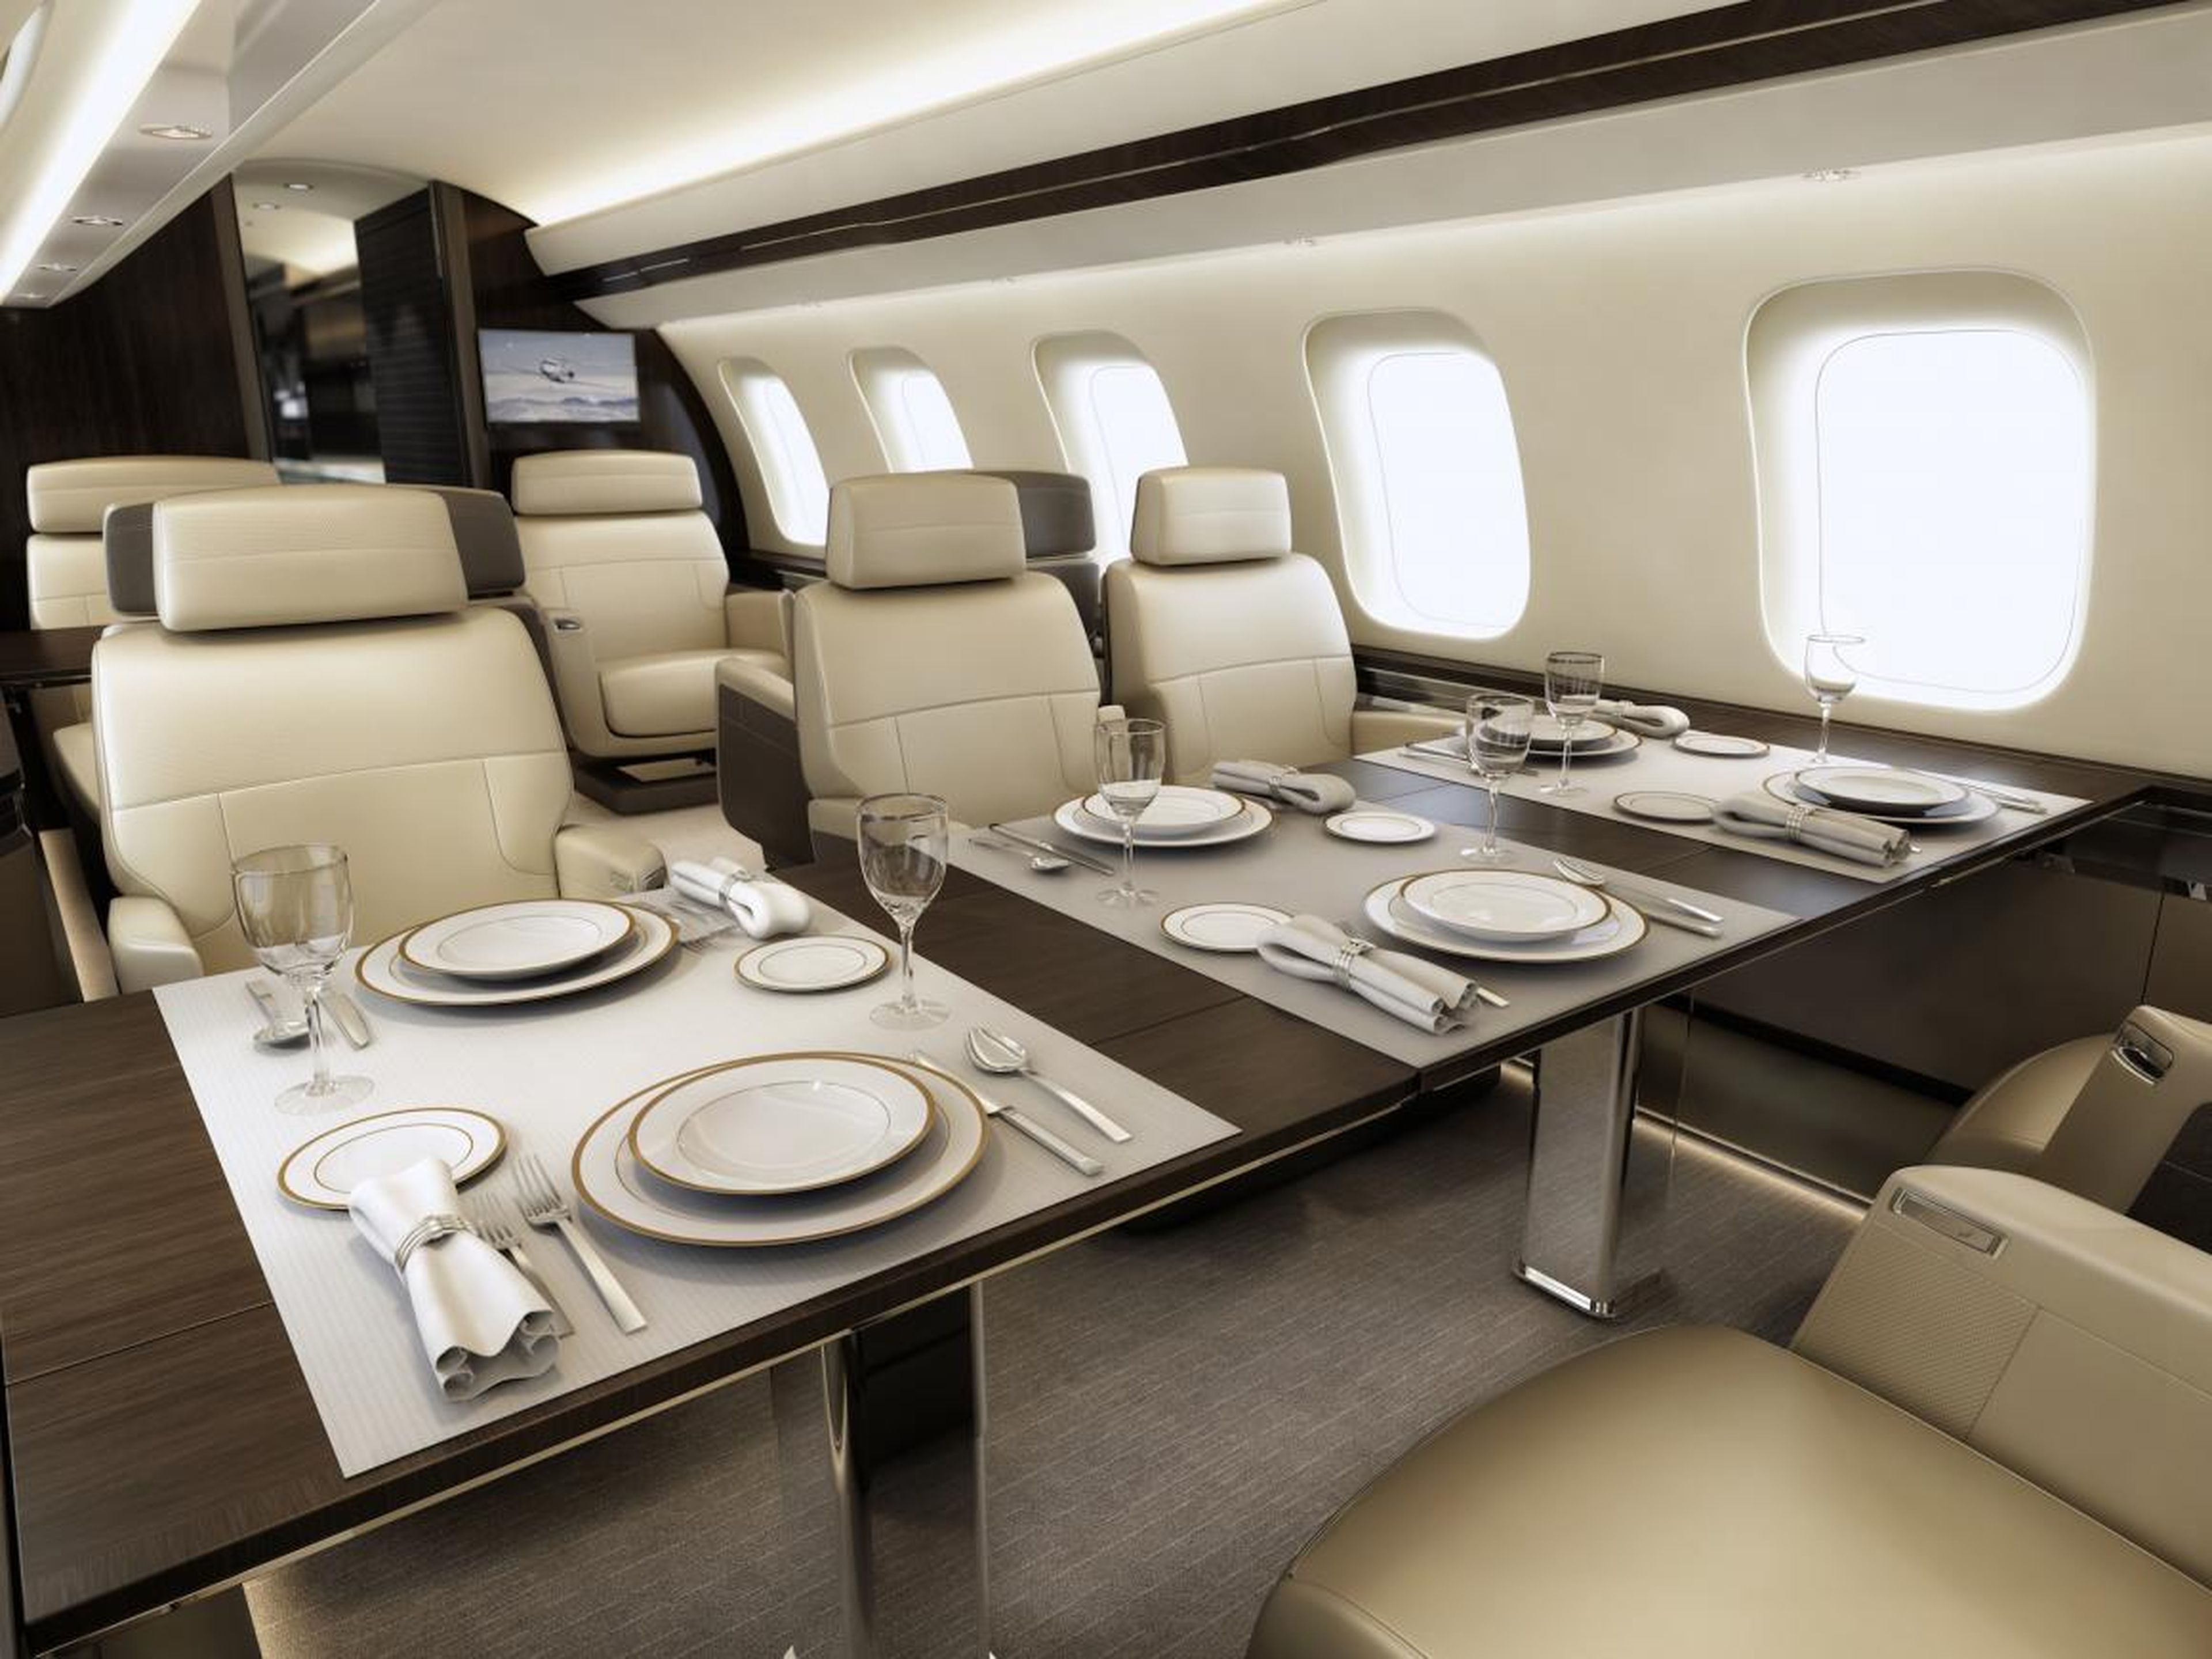 The cabin can be configured in a variety of ways, including a with full dining room ...